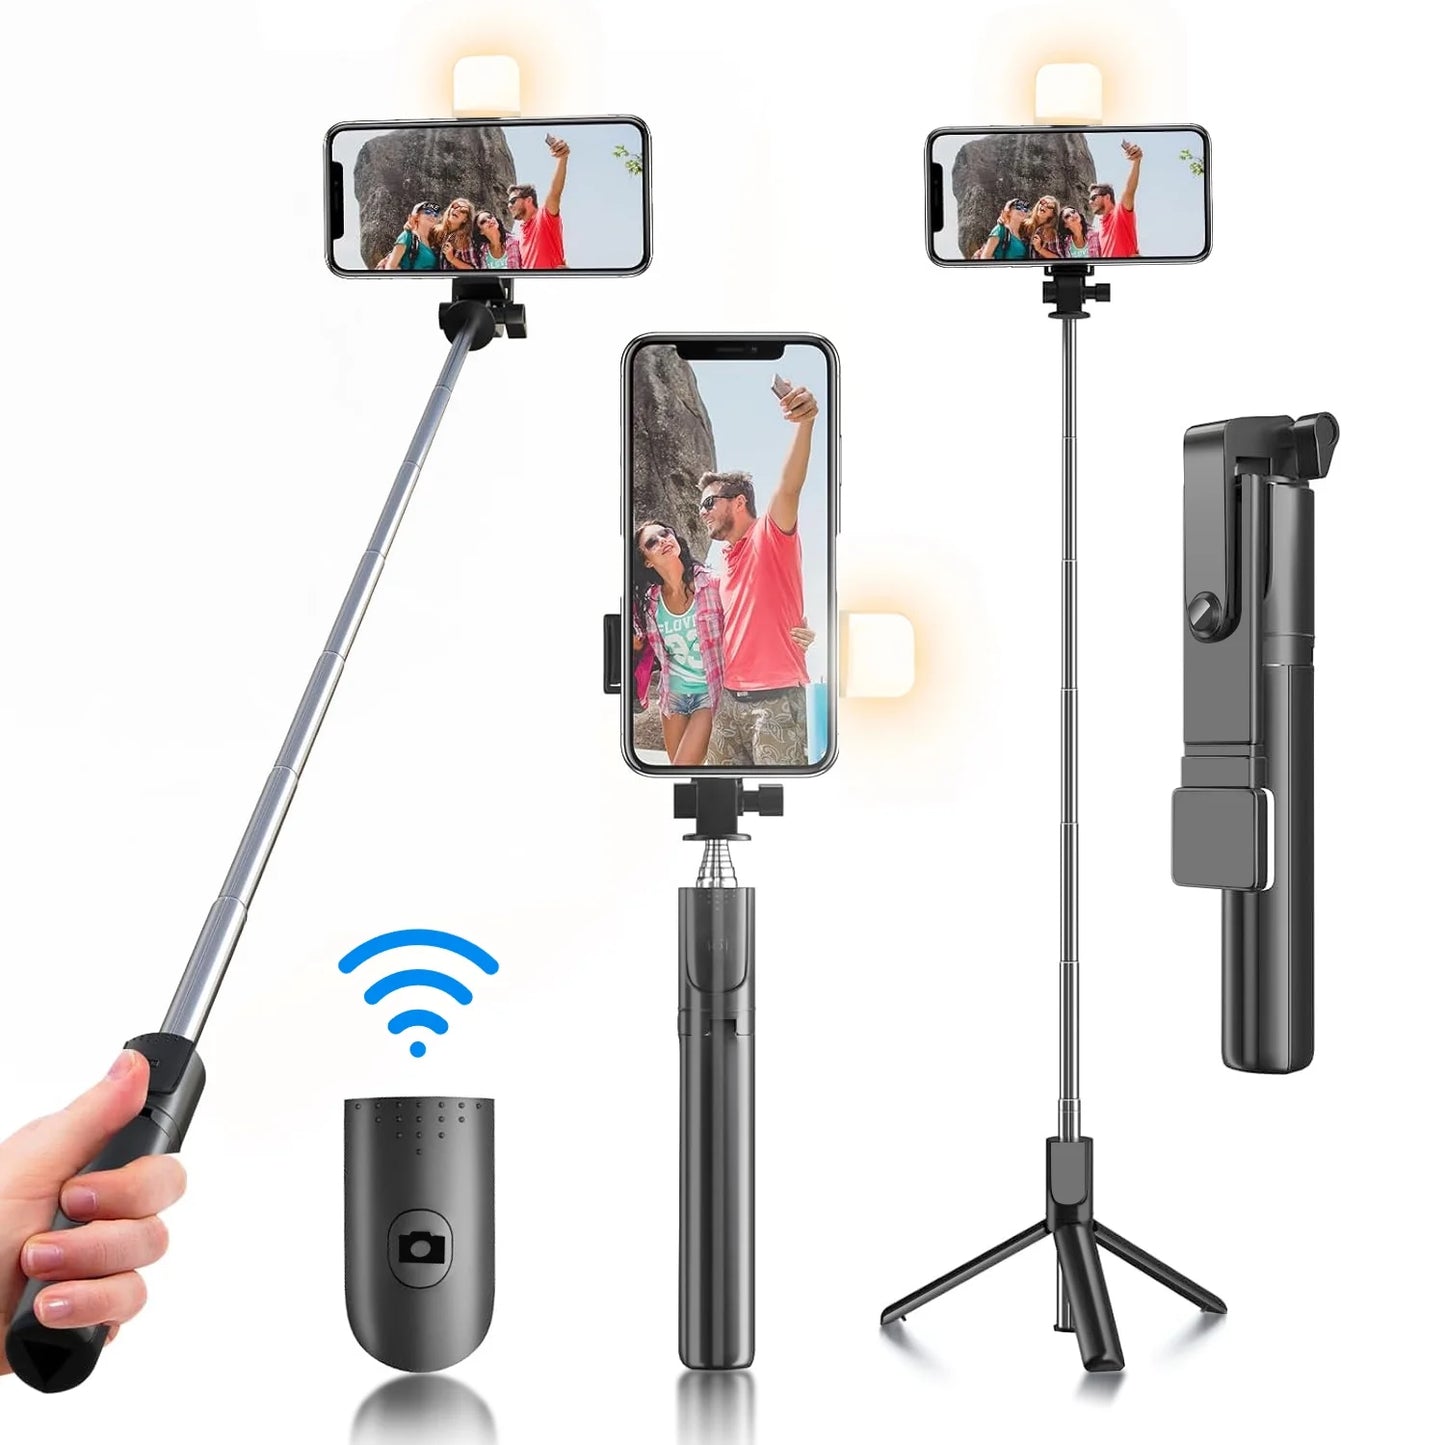 Selfie Stick, 40 in Retractable Selfie Stick Tripod with Remote, 2 Level Fill Light, Selfie Stick for Iphone Android, Black